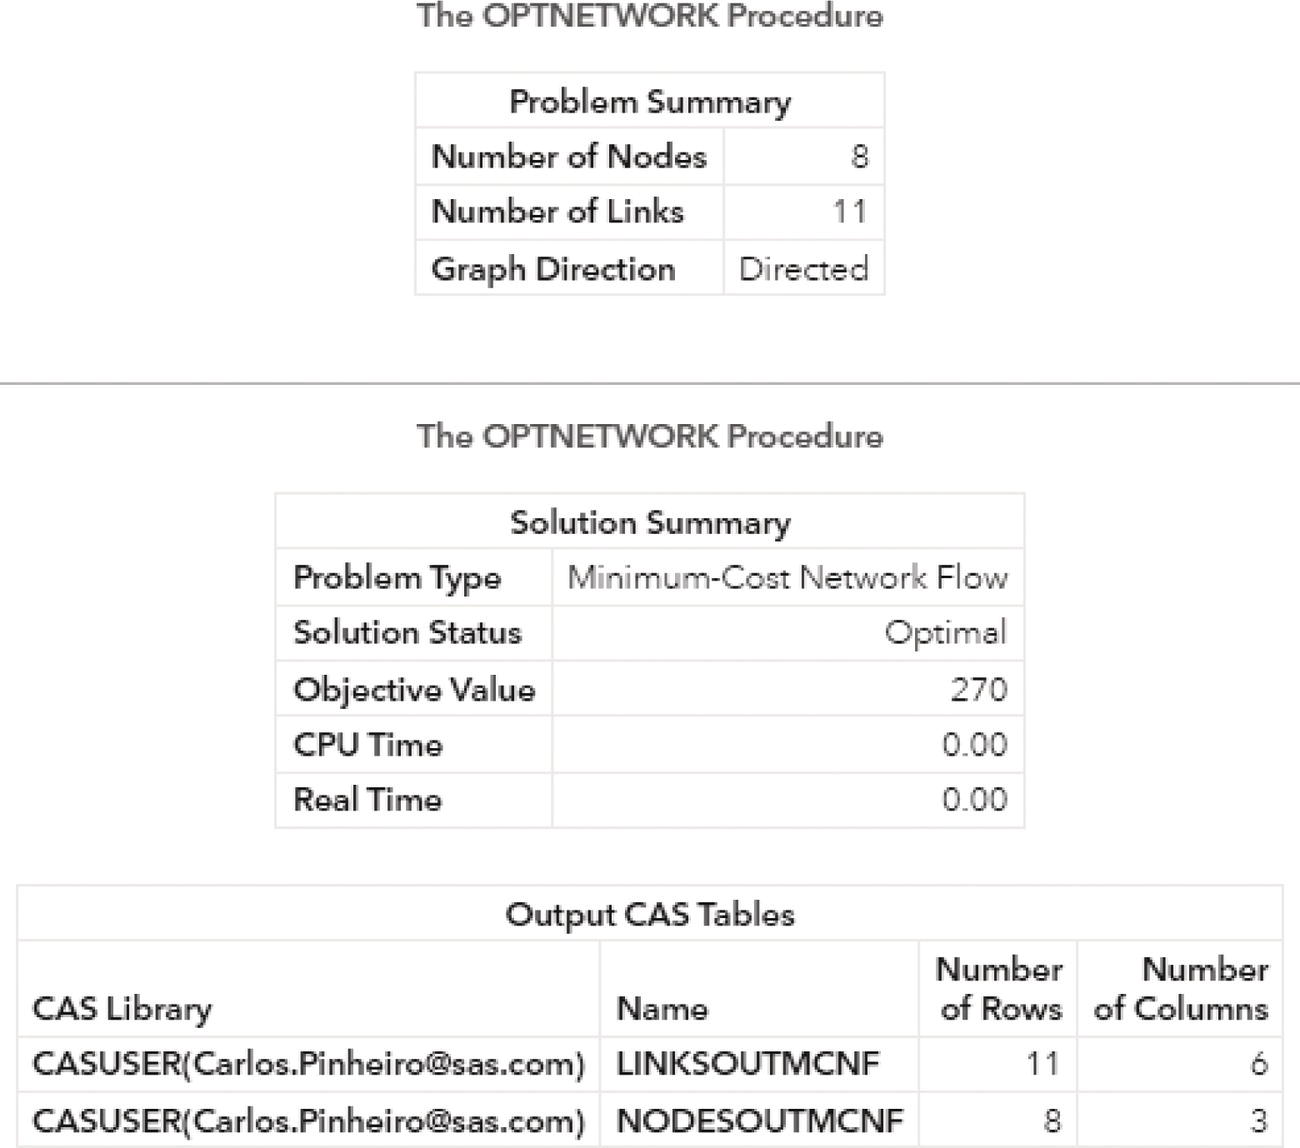 Screenshot of output results by proc optnetwork running the minimum-cost network flow algorithm.